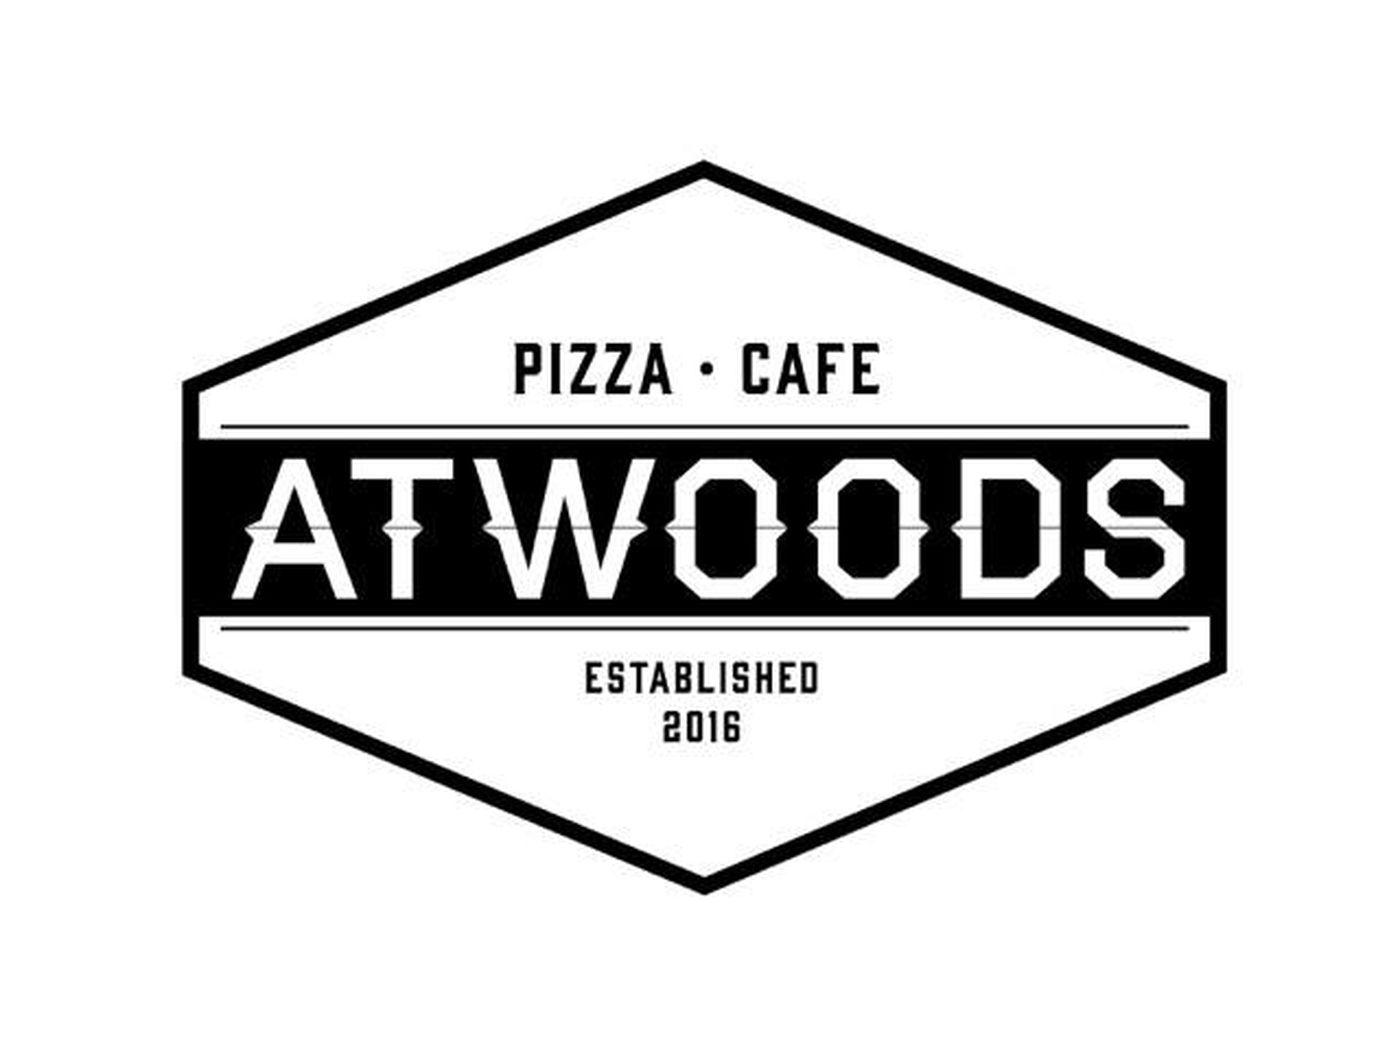 Atwoods Logo - Billy Streck's Atwoods Pizza Cafe Is Open; Here's the Menu - Eater ...